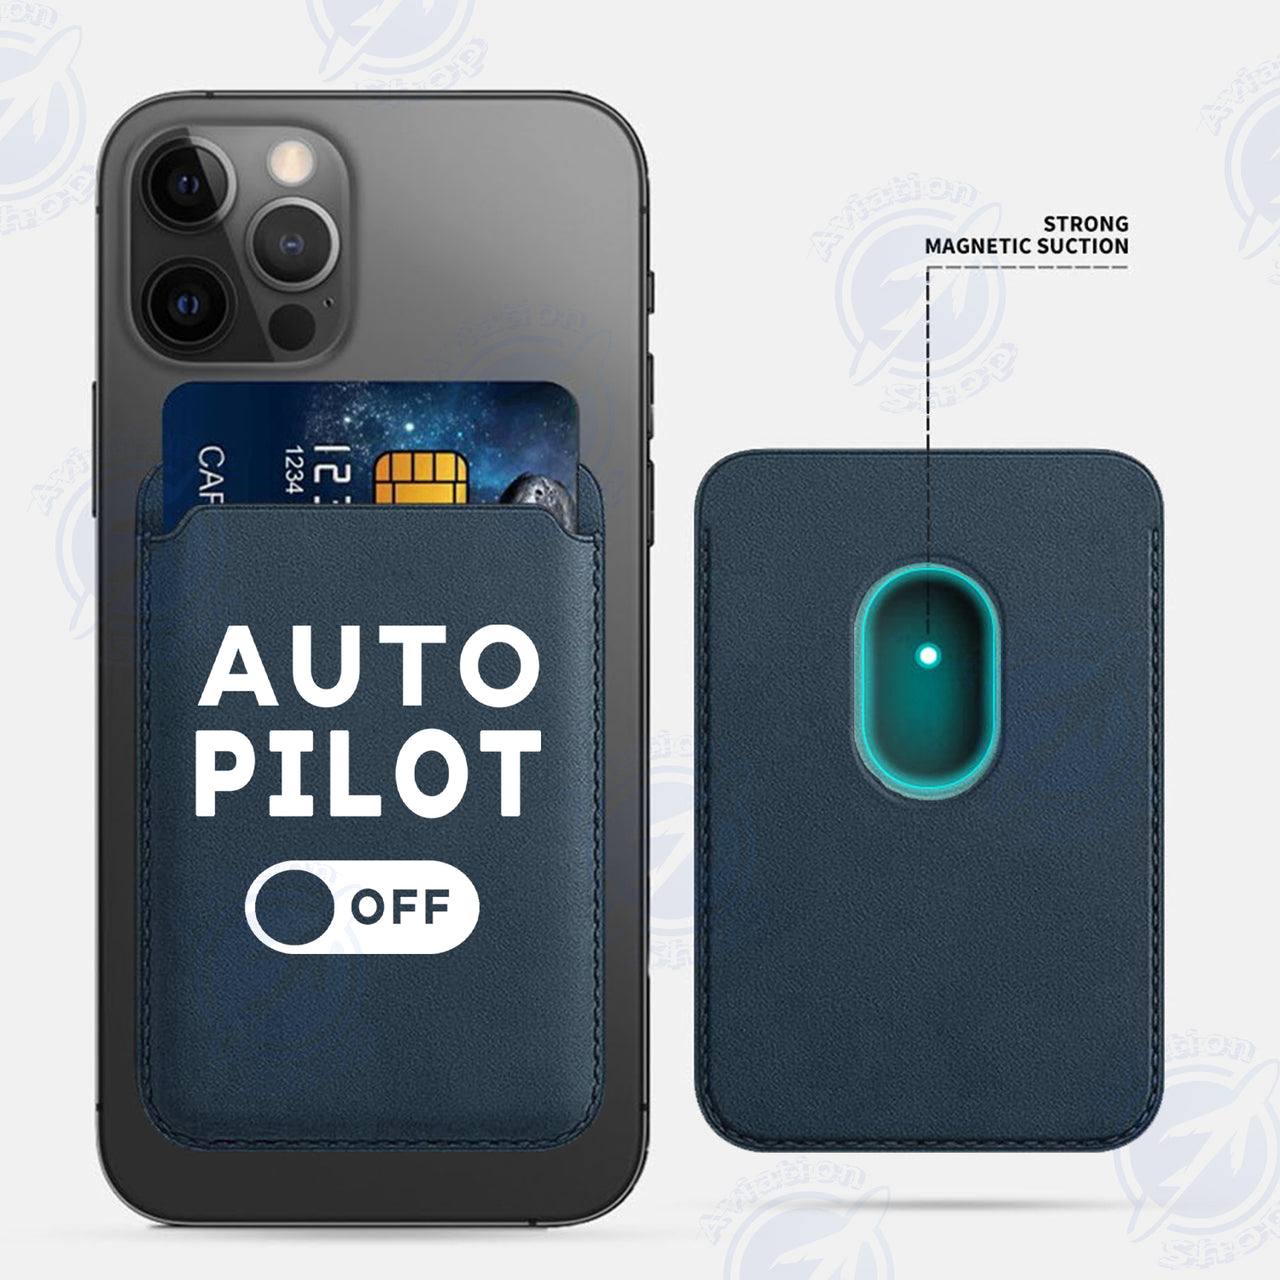 Auto Pilot Off iPhone Cases Magnetic Card Wallet